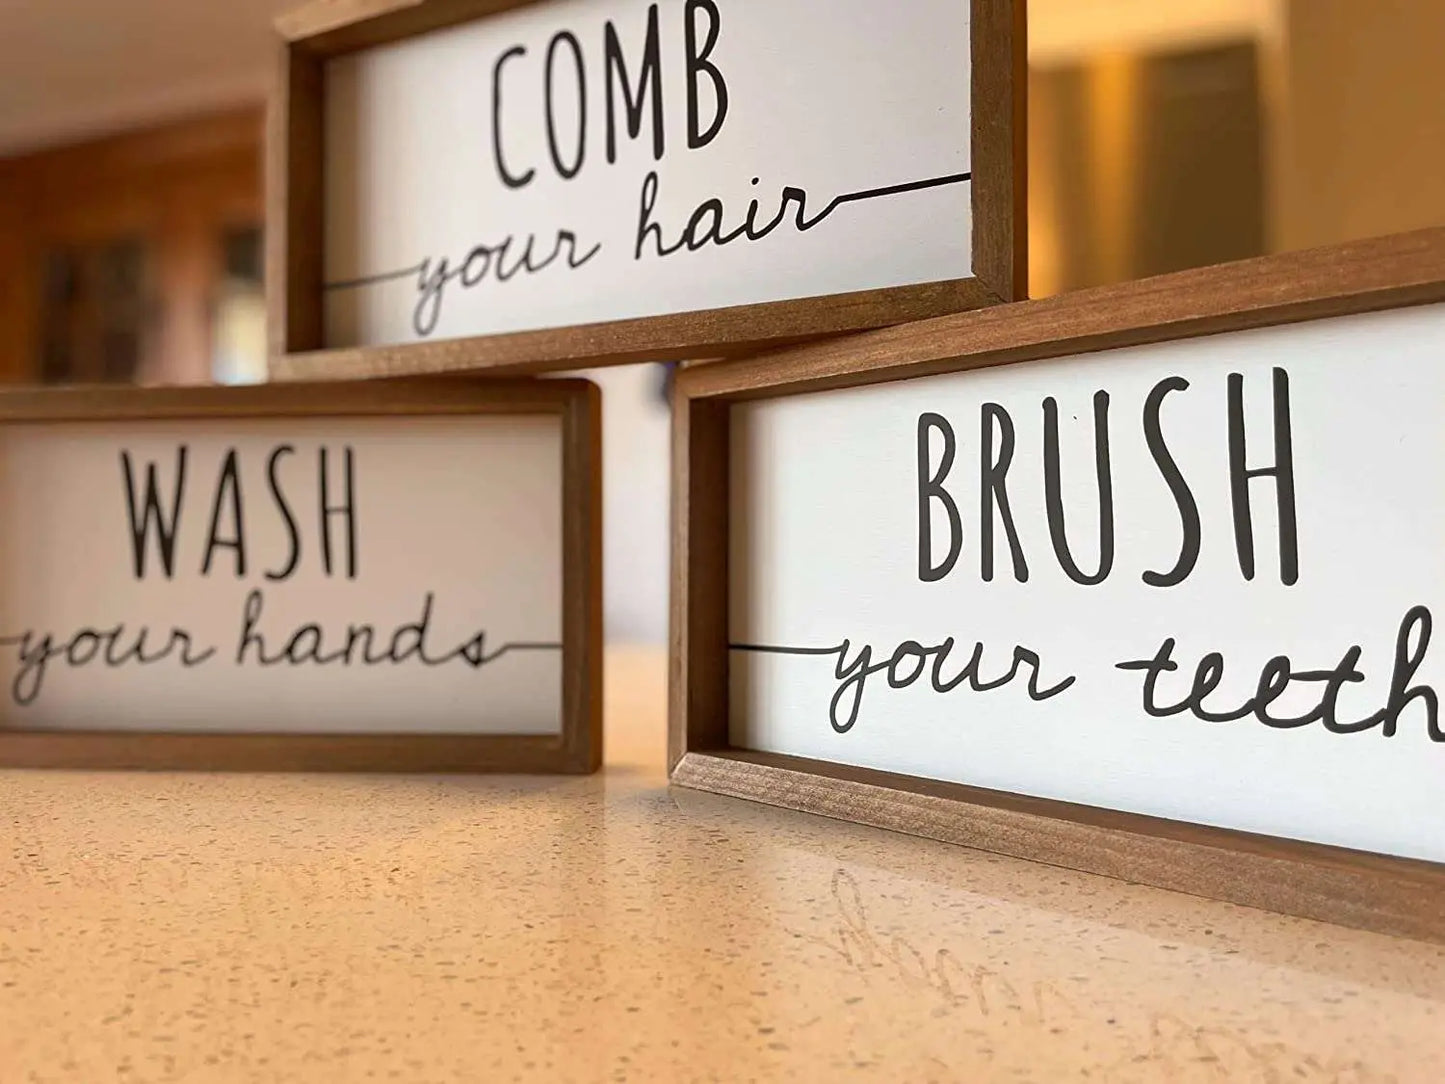 Wash Your Hands, Brush Your Teeth & Comb Your Hair Decor (Set) MK Smith's Shop